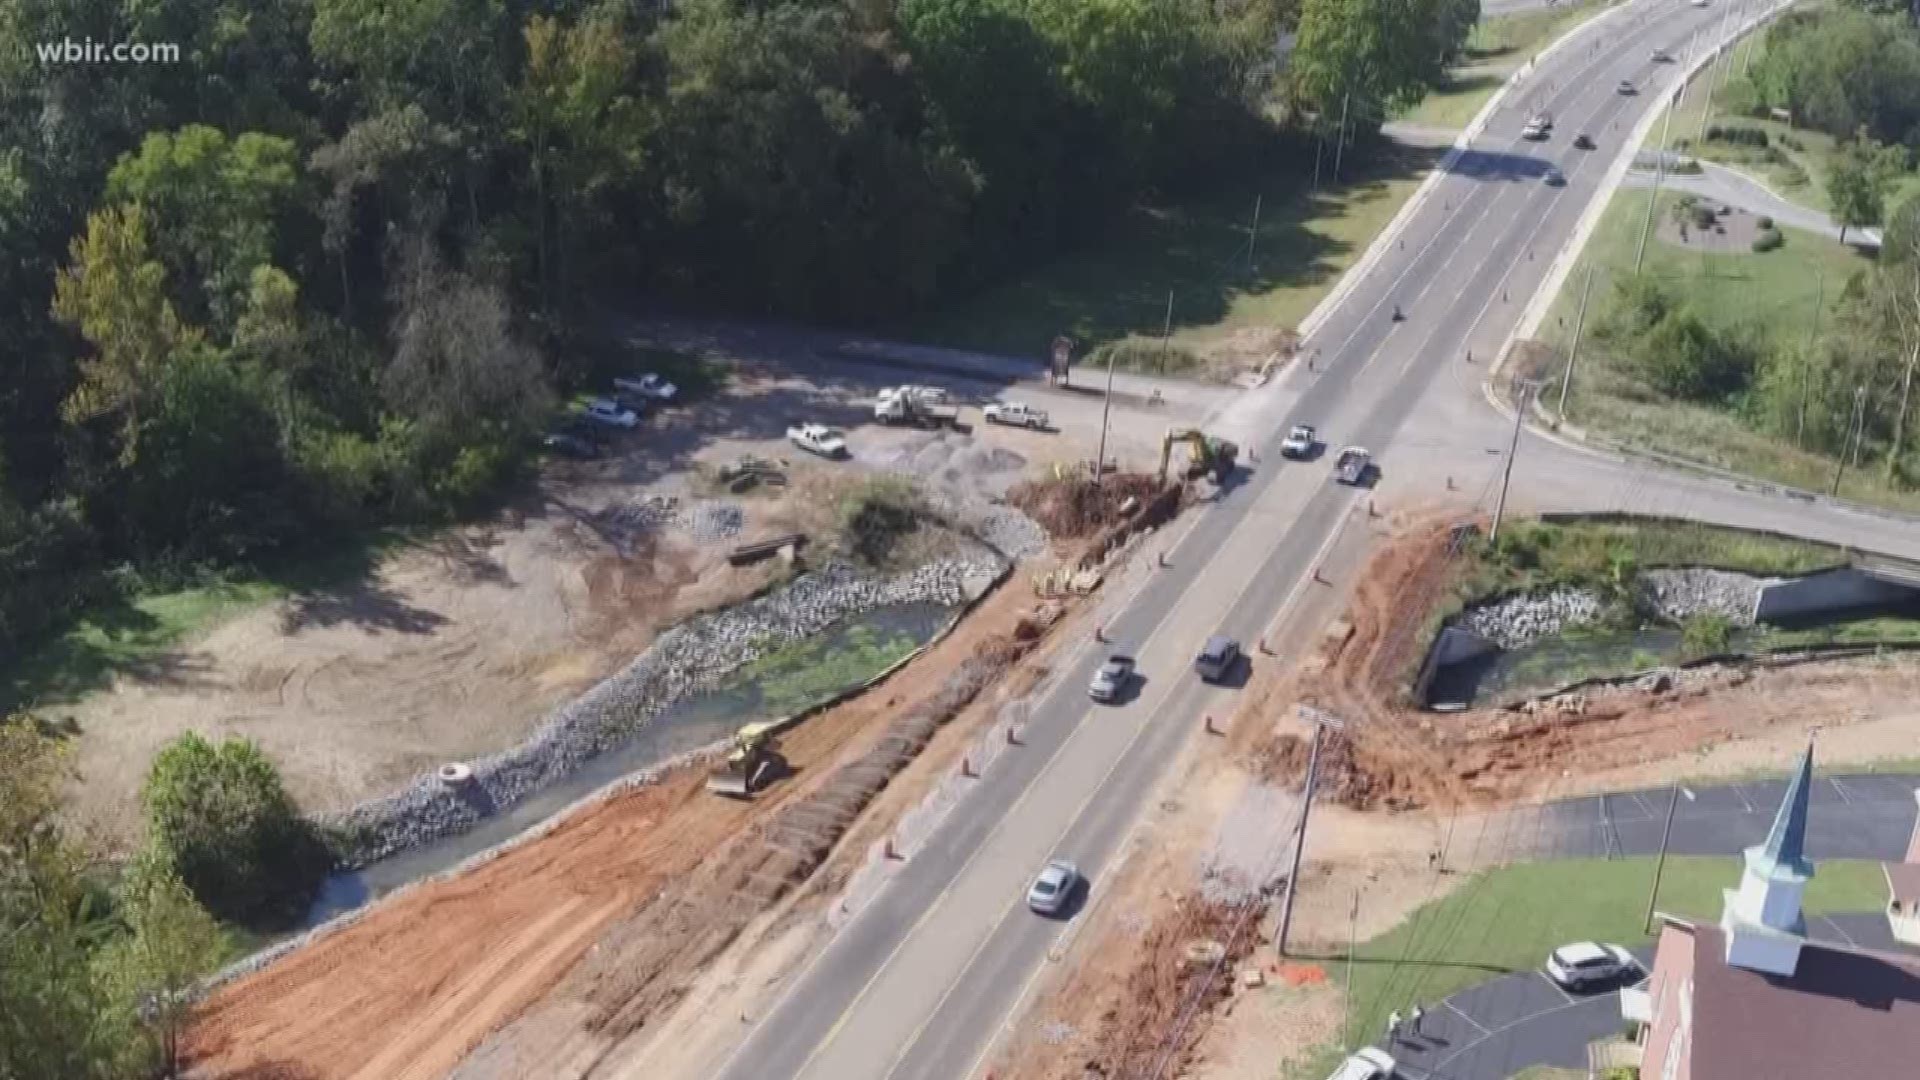 WBIR 10News Reporter Yvonne Thomas is live with an update on the construction on Western Avenue.